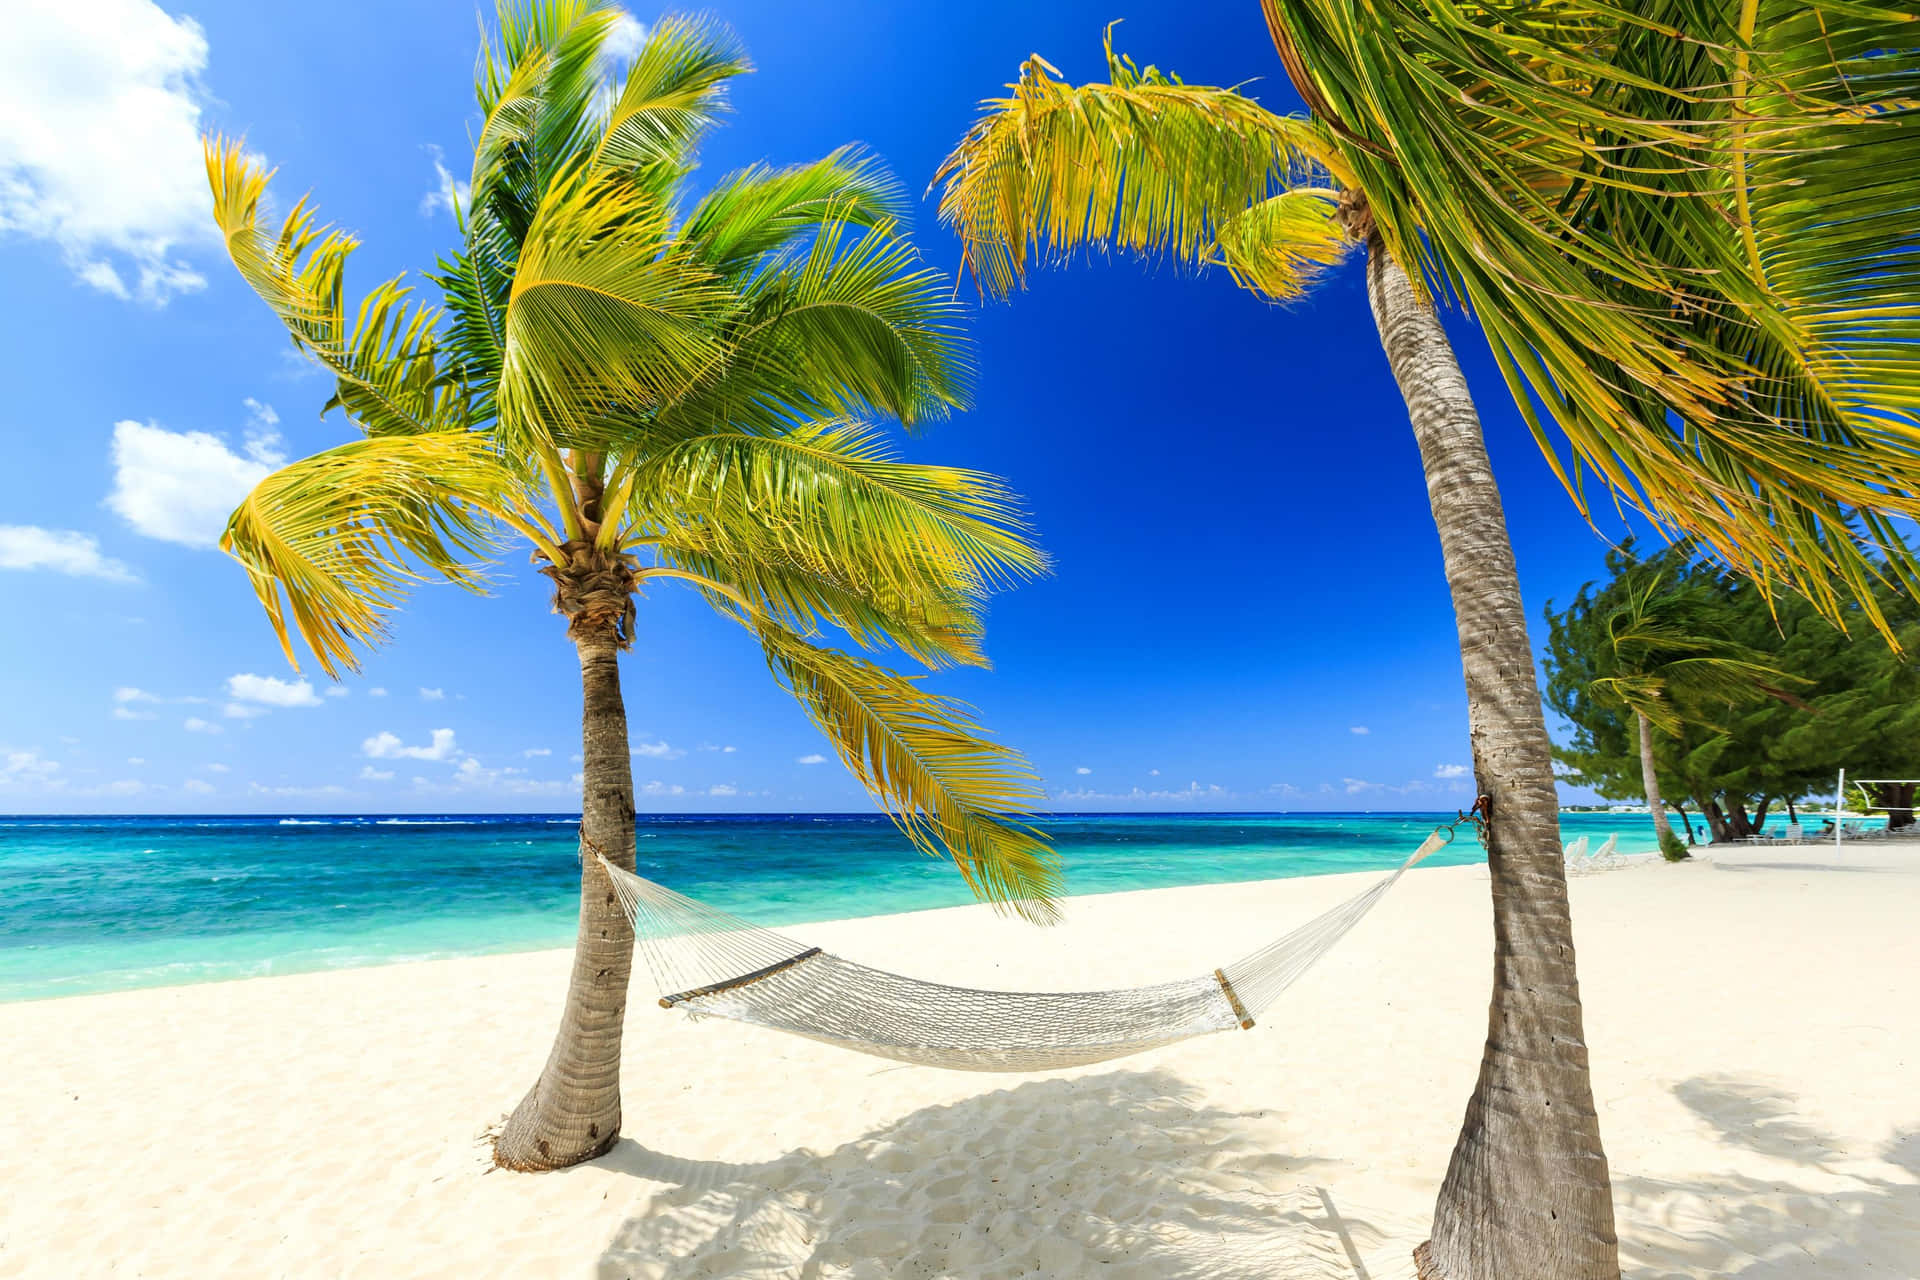 "Sundrenched Paradise: Tropical Beach Framed by Palm Trees" Wallpaper